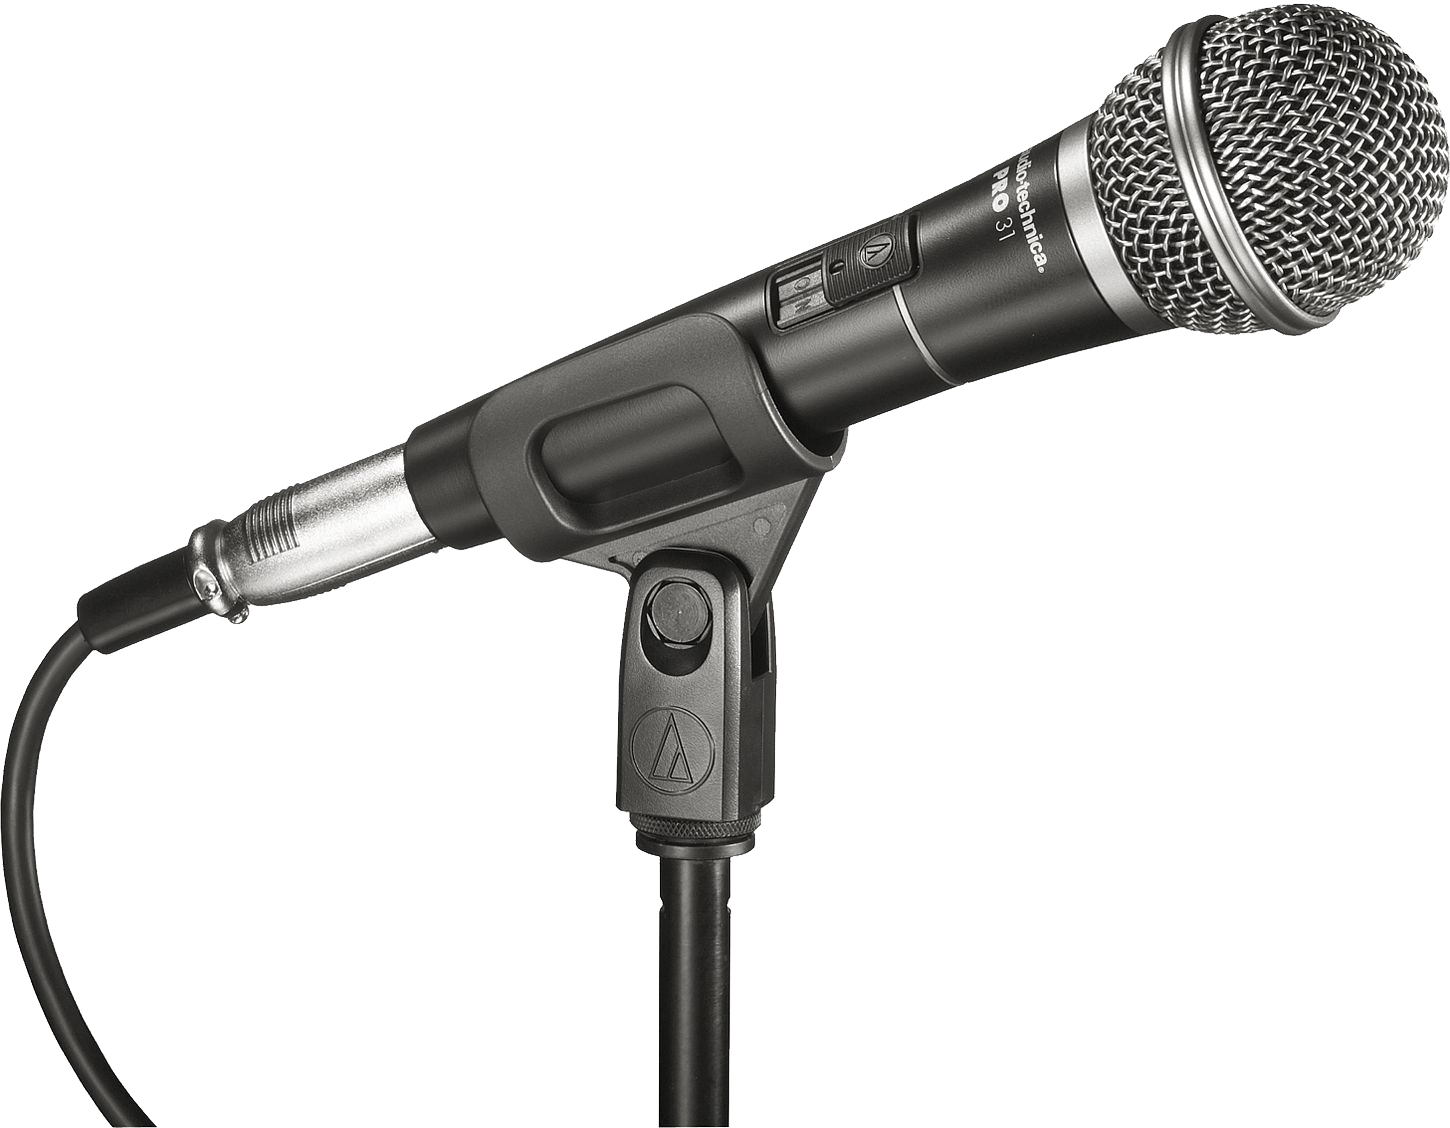 Speakers clipart public meeting. Microphone png image transparent